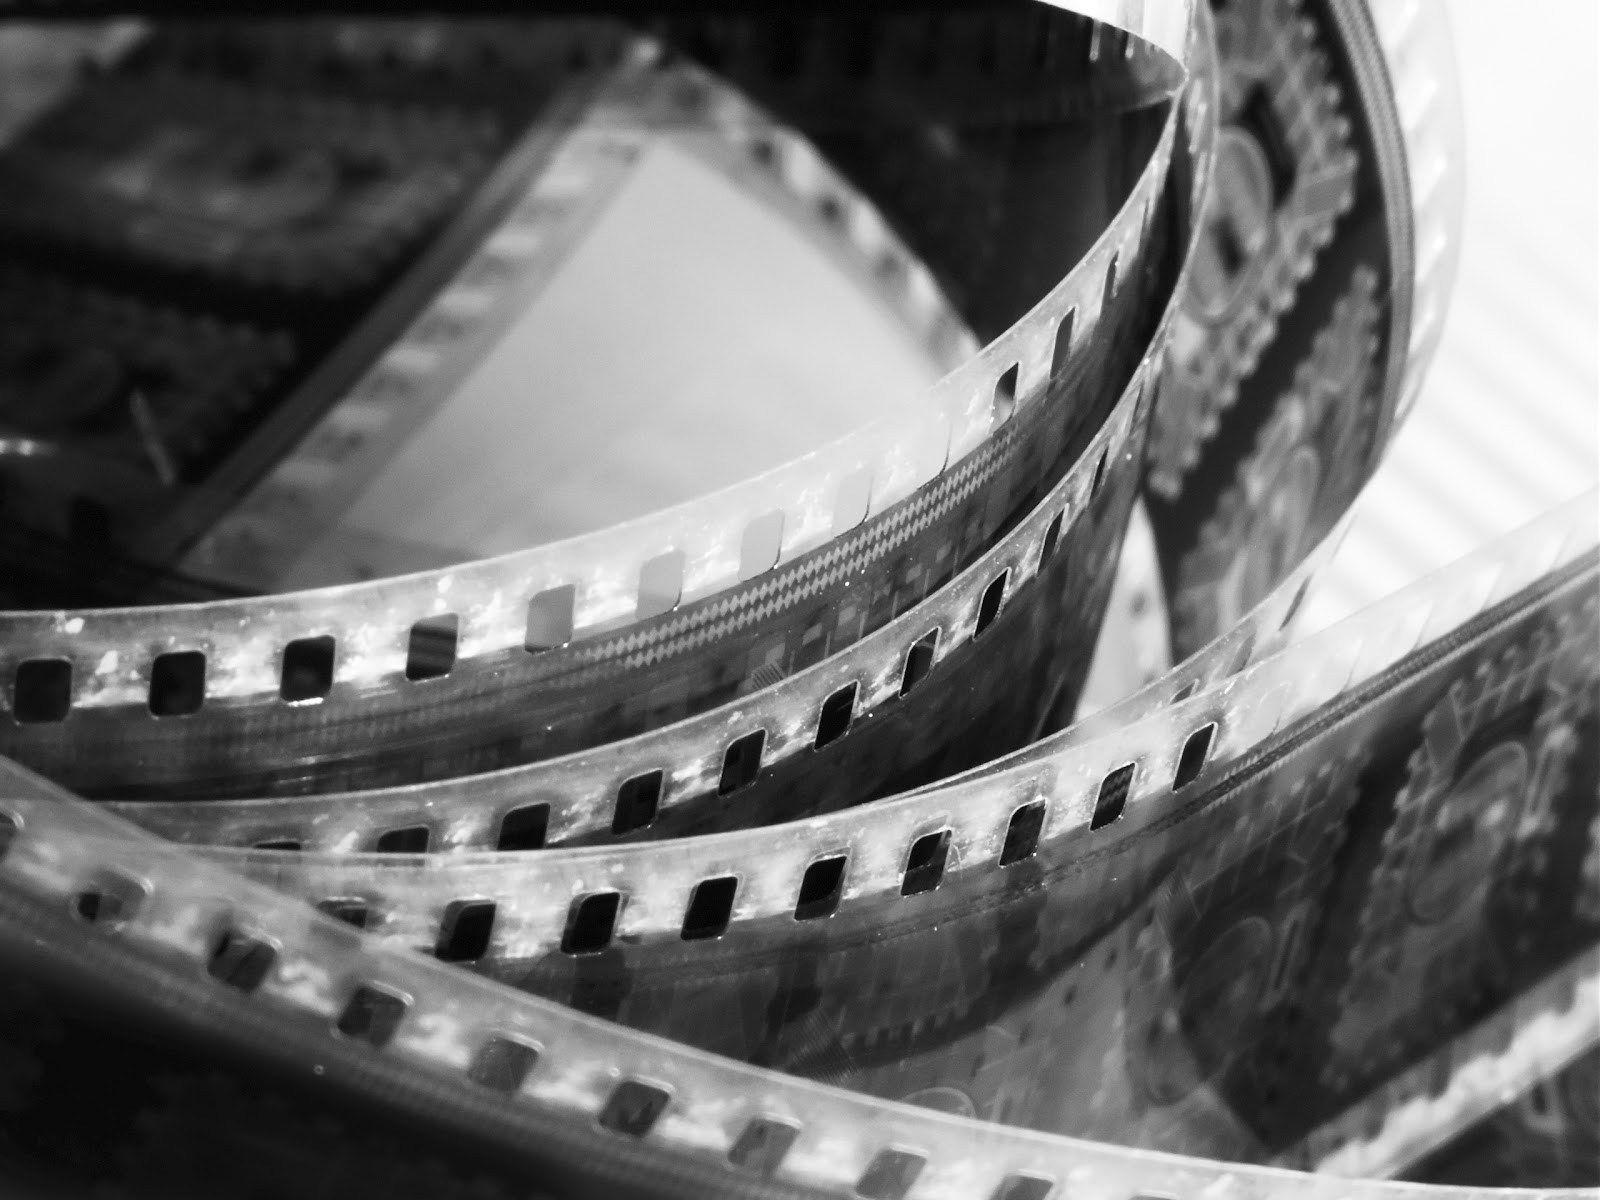 Tedious Film Editing Could Soon Become a Thing of the Past